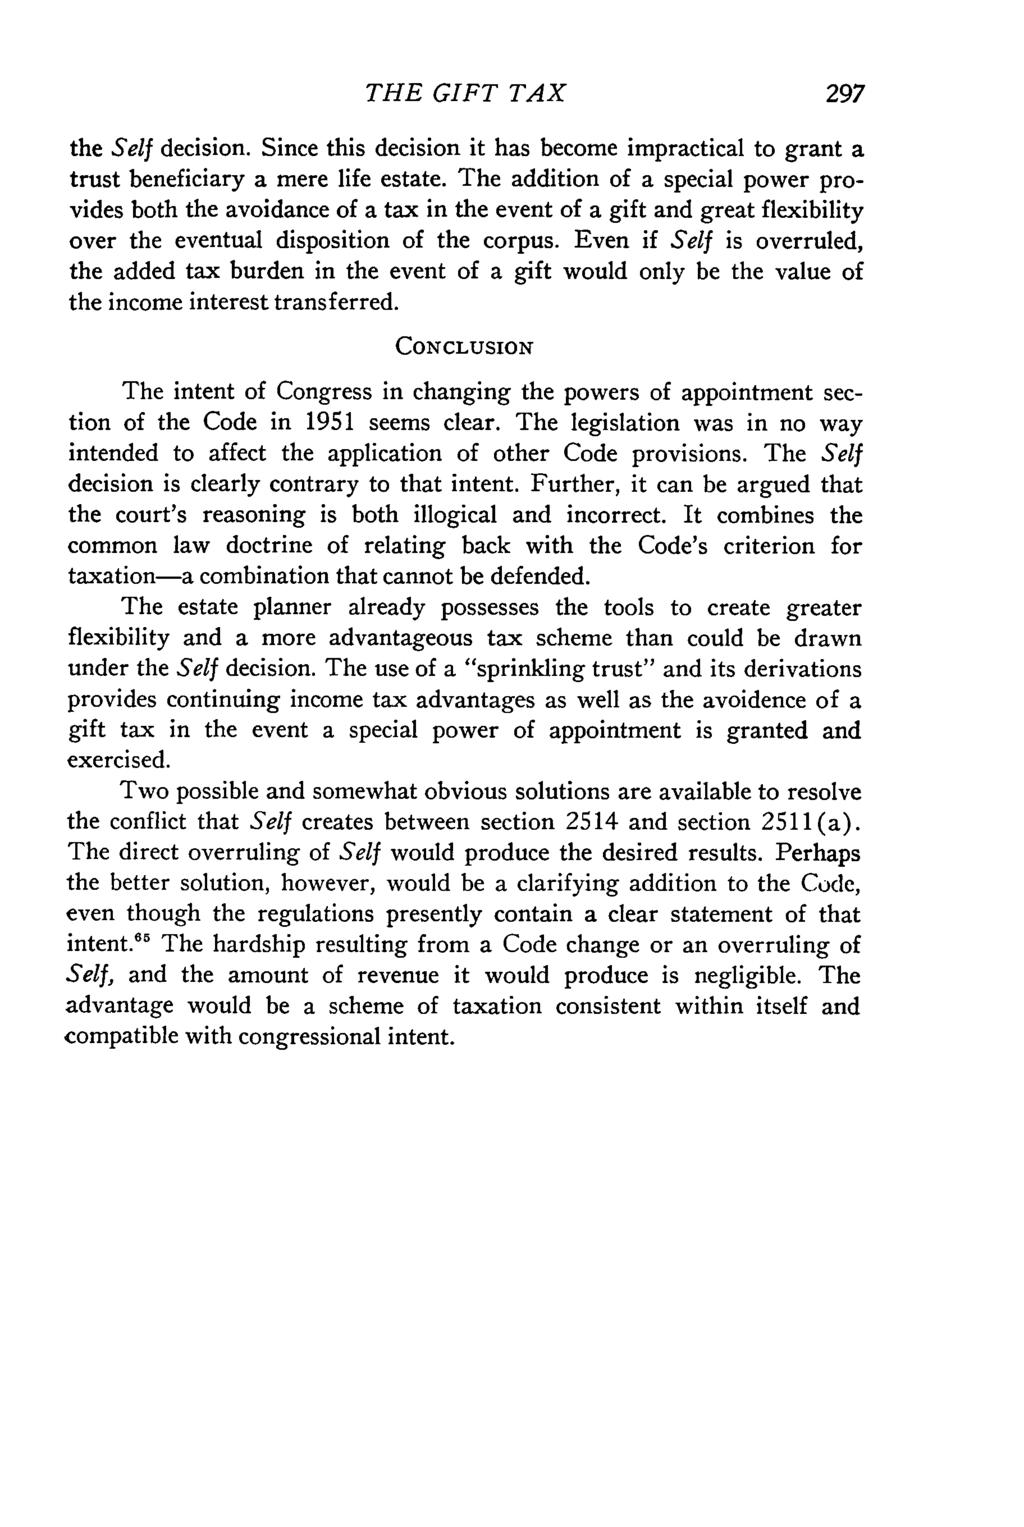 Valparaiso University Law Review, Vol. 3, No. 2 [1969], Art. 8 THE GIFT TAX the Self decision. Since this decision it has become impractical to grant a trust beneficiary a mere life estate.